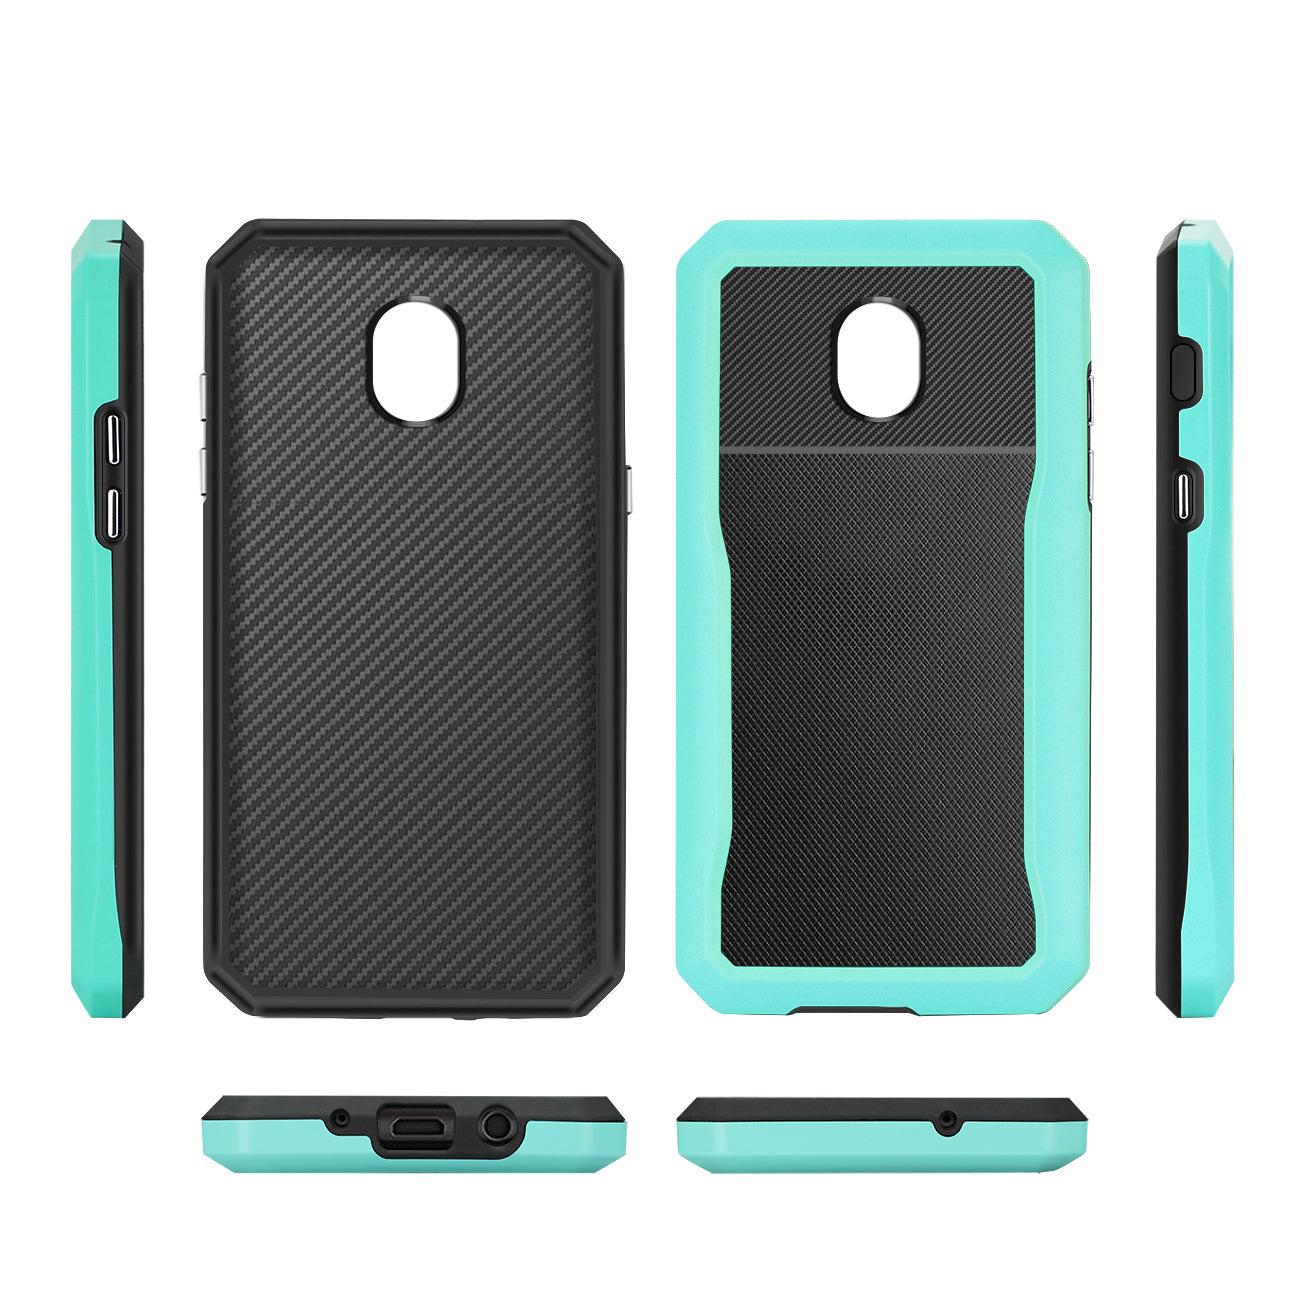 Reiko SAMSUNG GALAXY J7 (2018) Full Coverage Shockproof Case In Blue